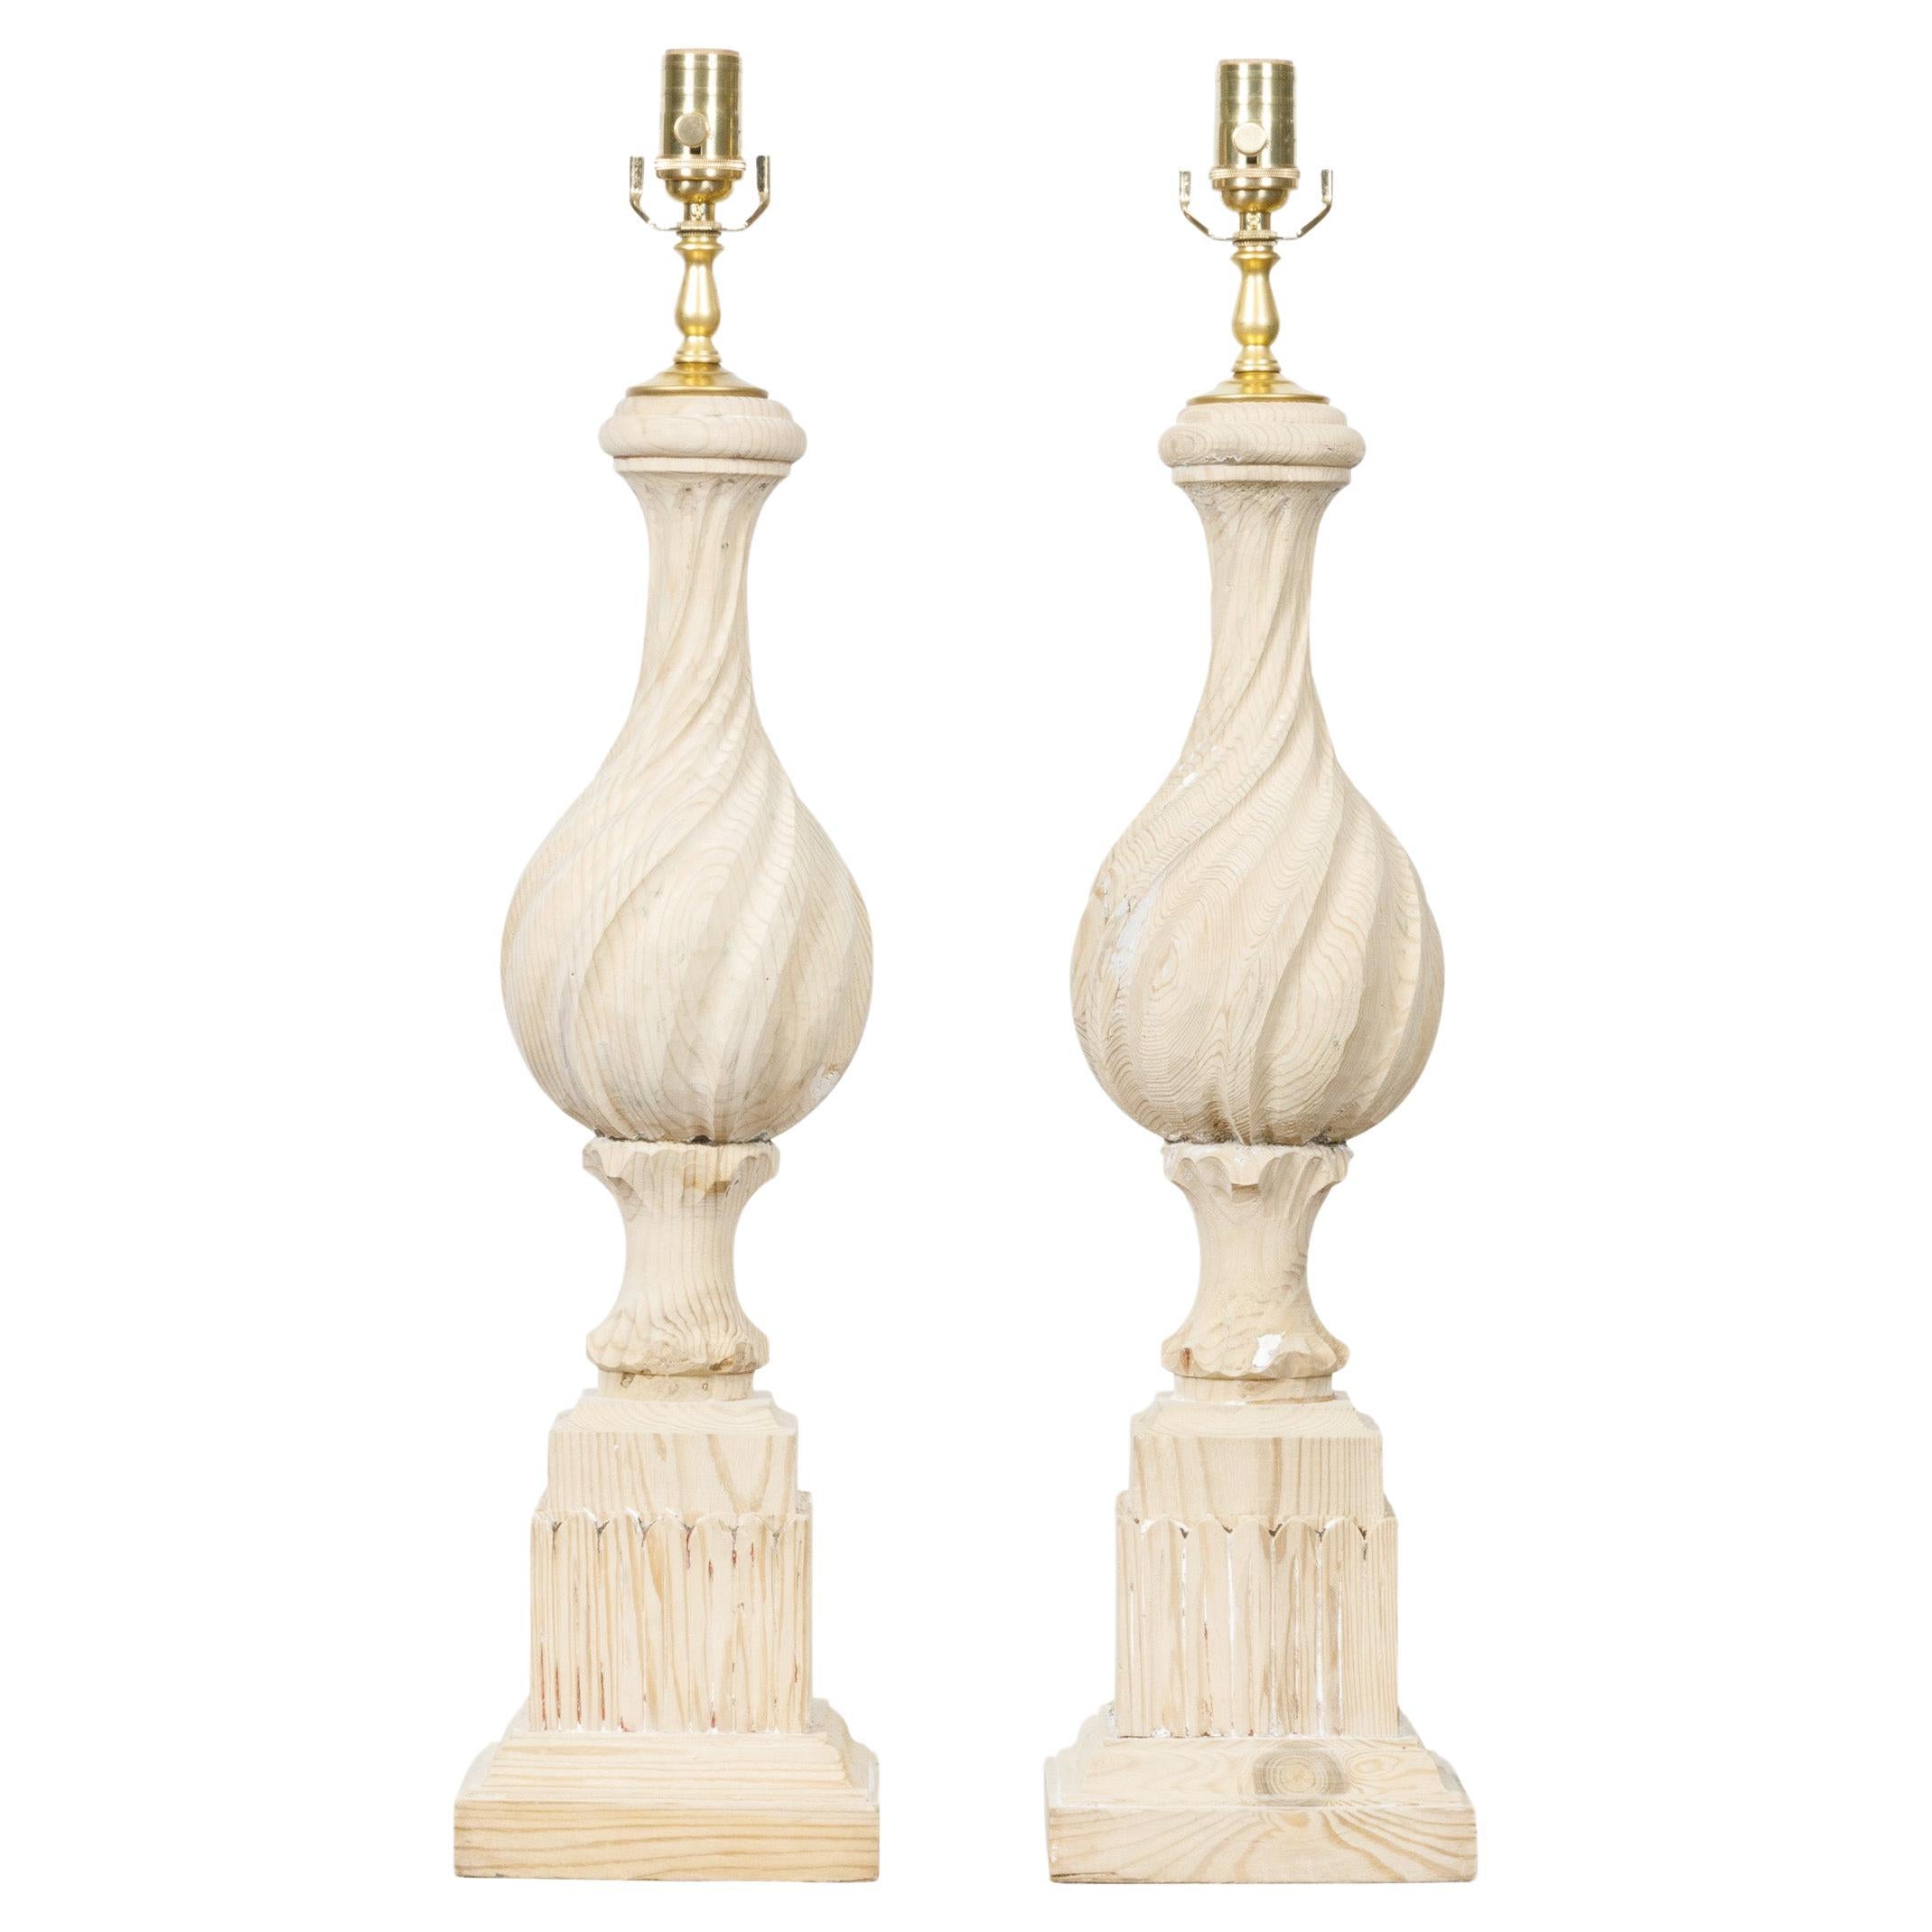 Pair of Pine Twisted Finials on Tall Bases Mounted as Table Lamps, USA Wired